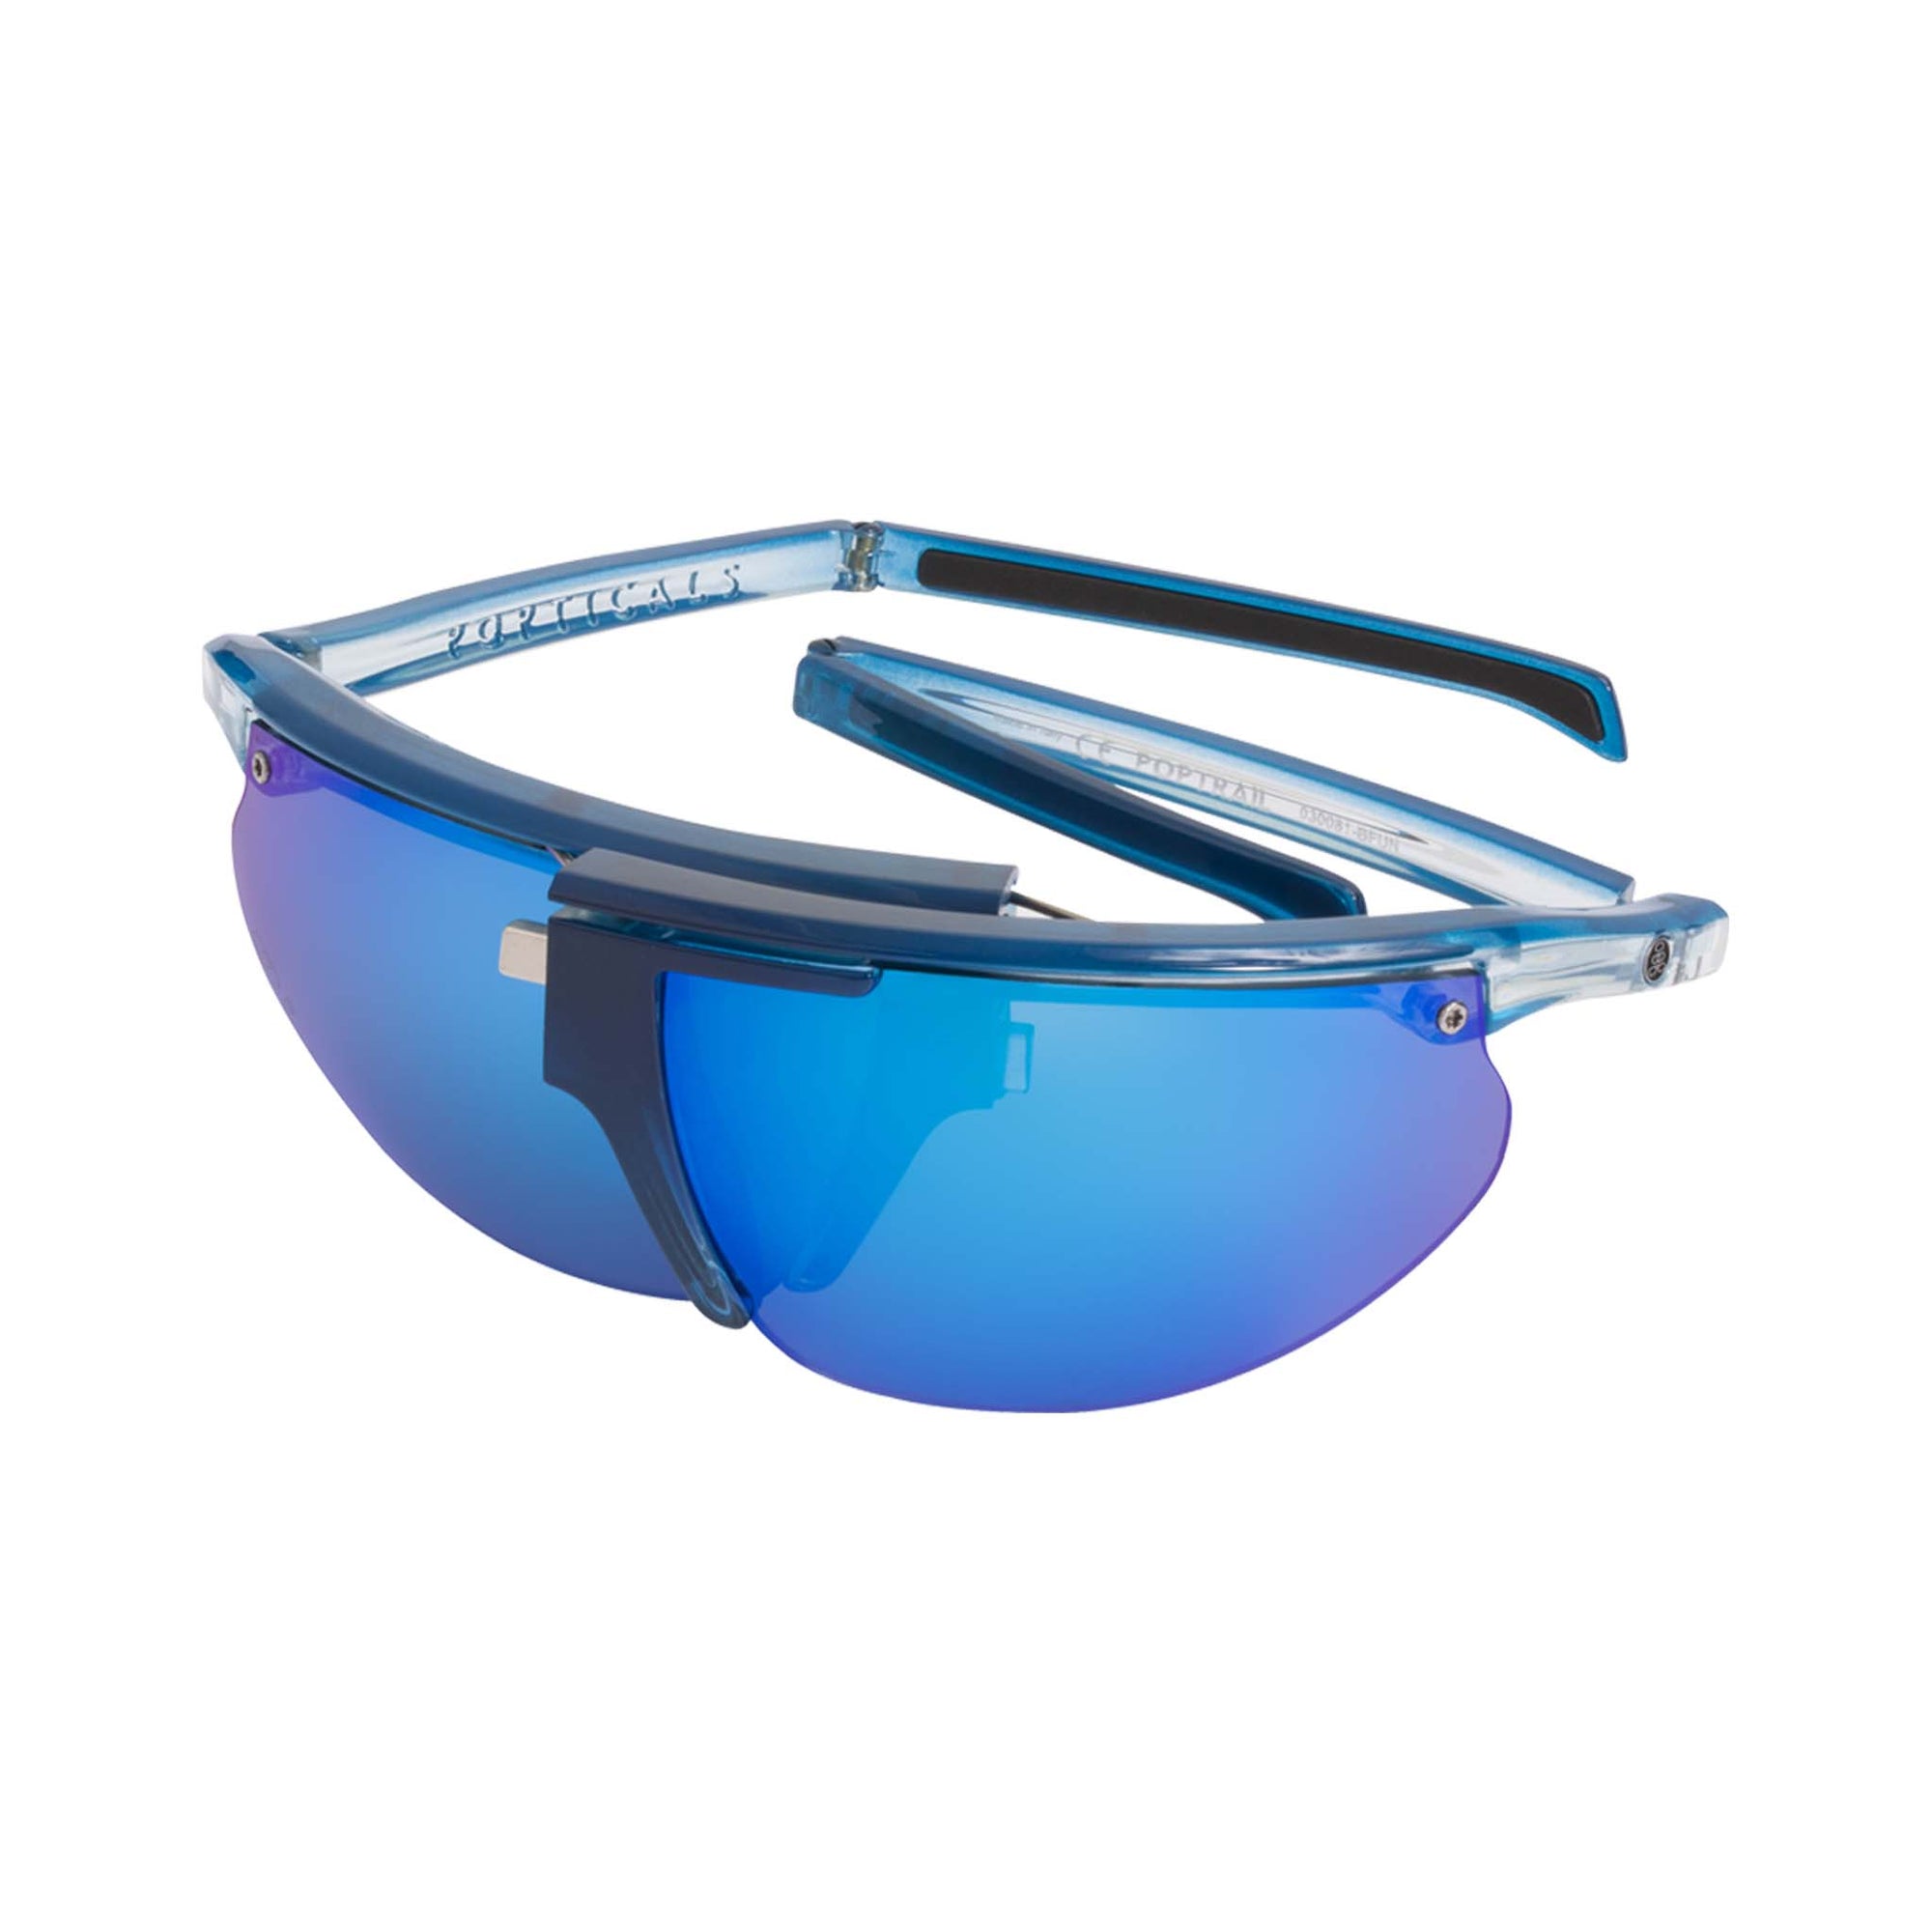 Popticals, Premium Compact Sunglasses, PopTrail, 030081-BFUN, Polarized Sunglasses, Gloss Blue over Crystal Frame, Gray Lenses w/Blue Mirror Finish, Glam View